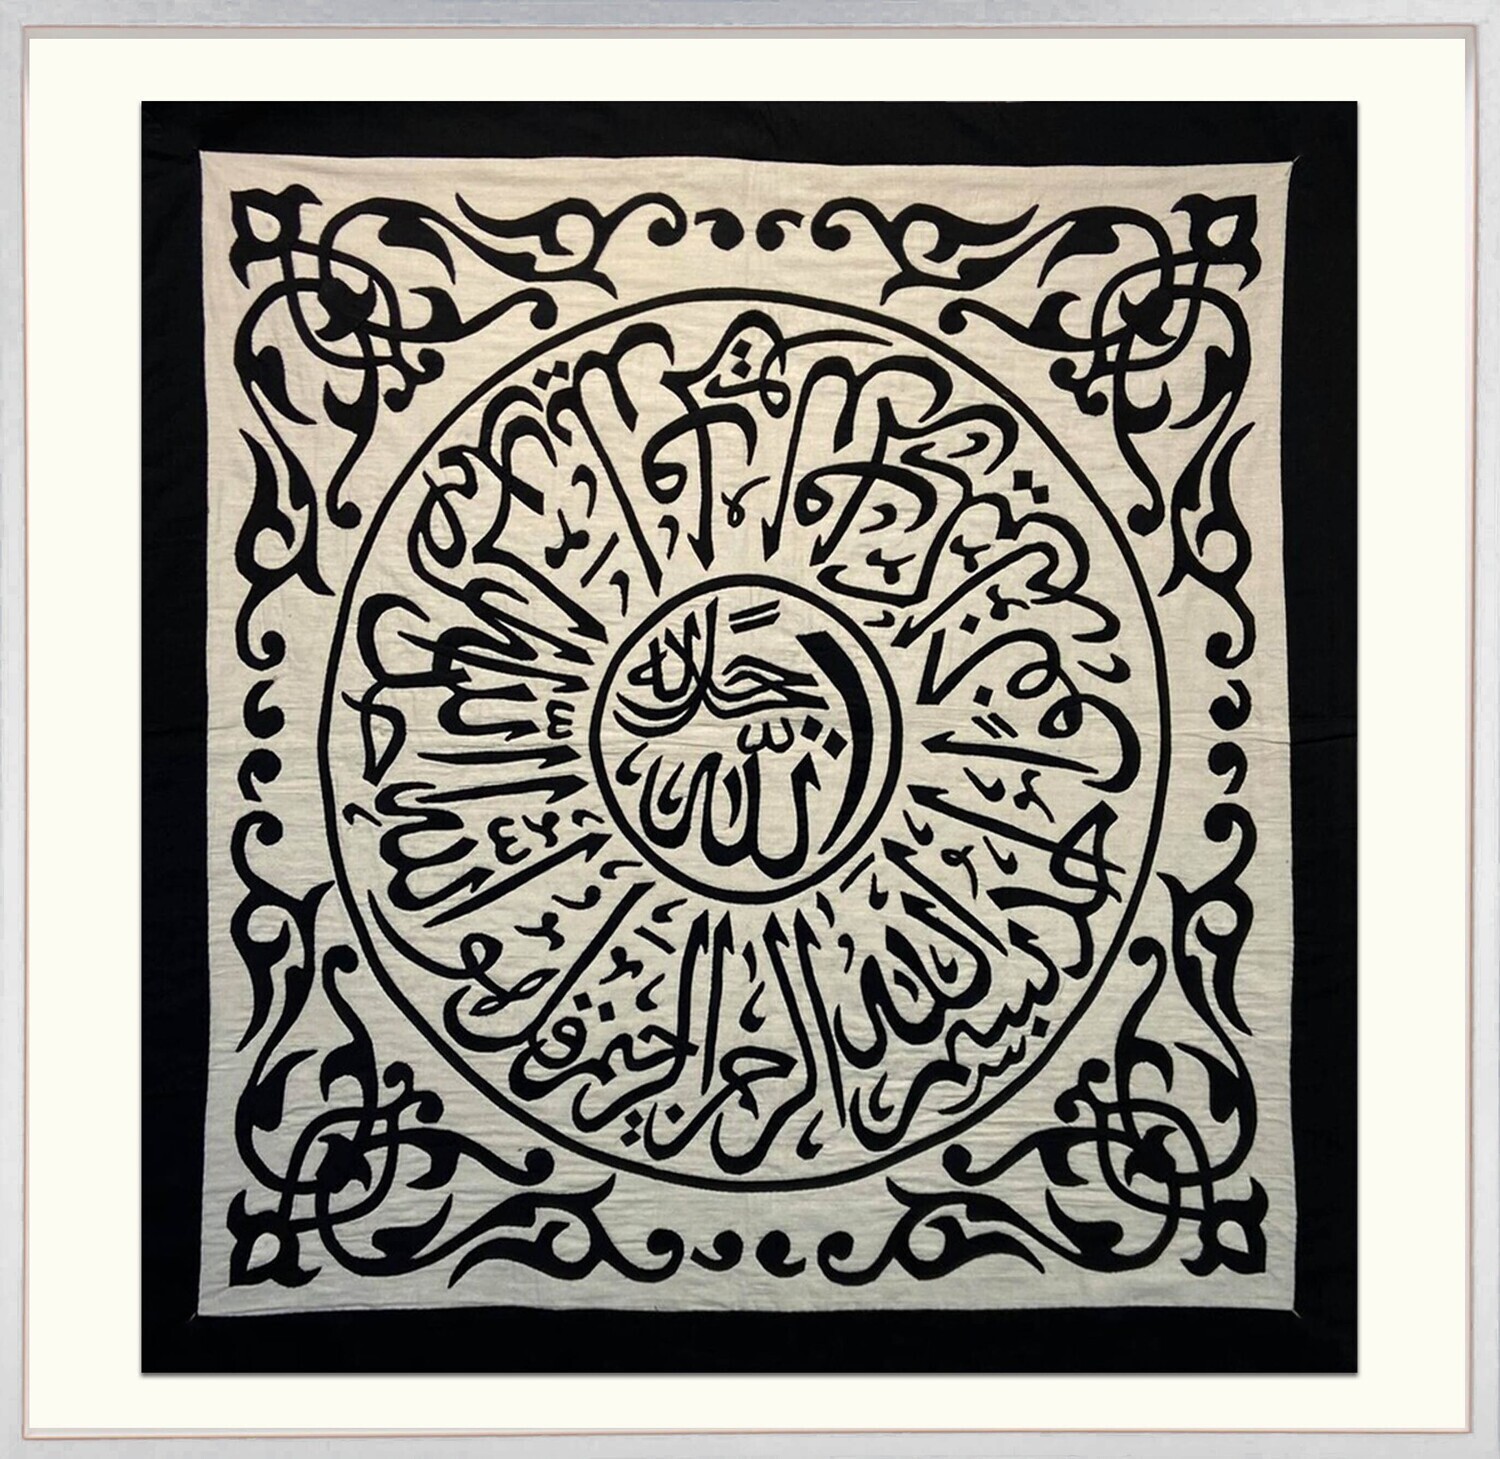 Surah Al-Ikhlas Black Thuluth Calligraphy Hand-Stitched Appliqué Mount Black Museum Frame